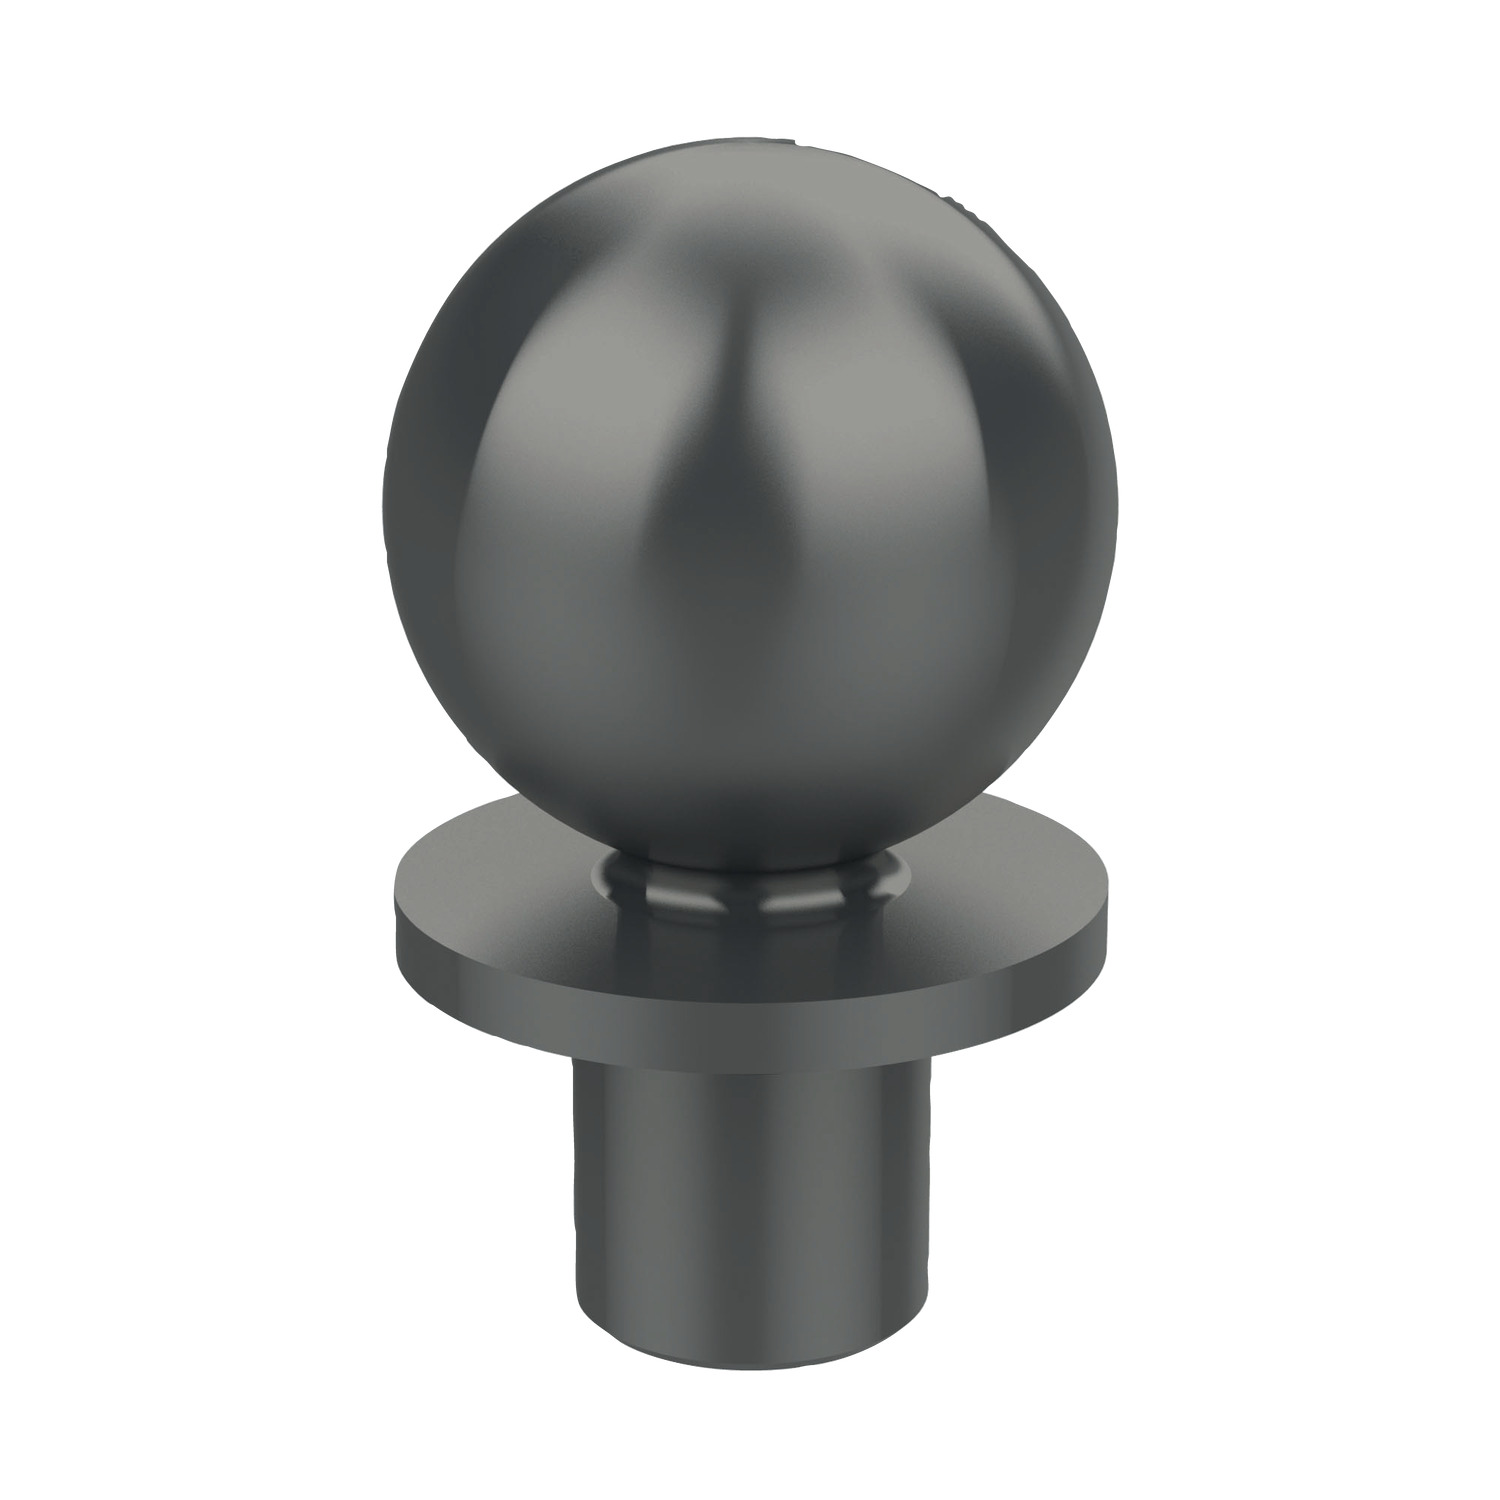 Construction Balls Construction balls with shoulder, available in imperial & metric measurements.